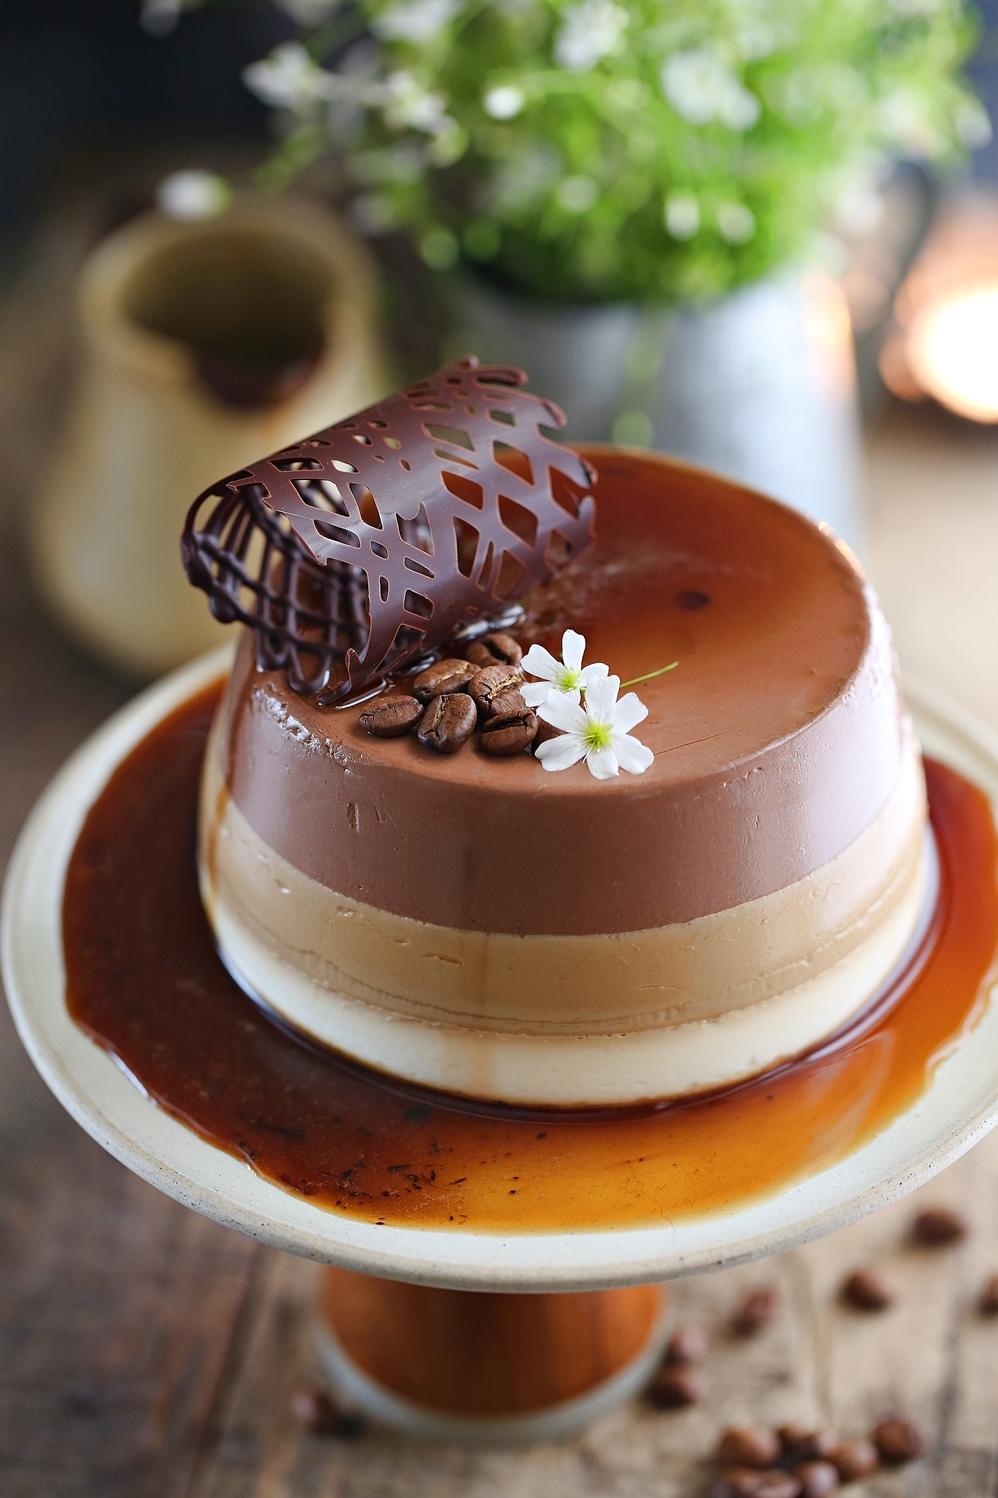  Want a dessert that tastes as good as it looks? Try the Coffee Panna Cotta!